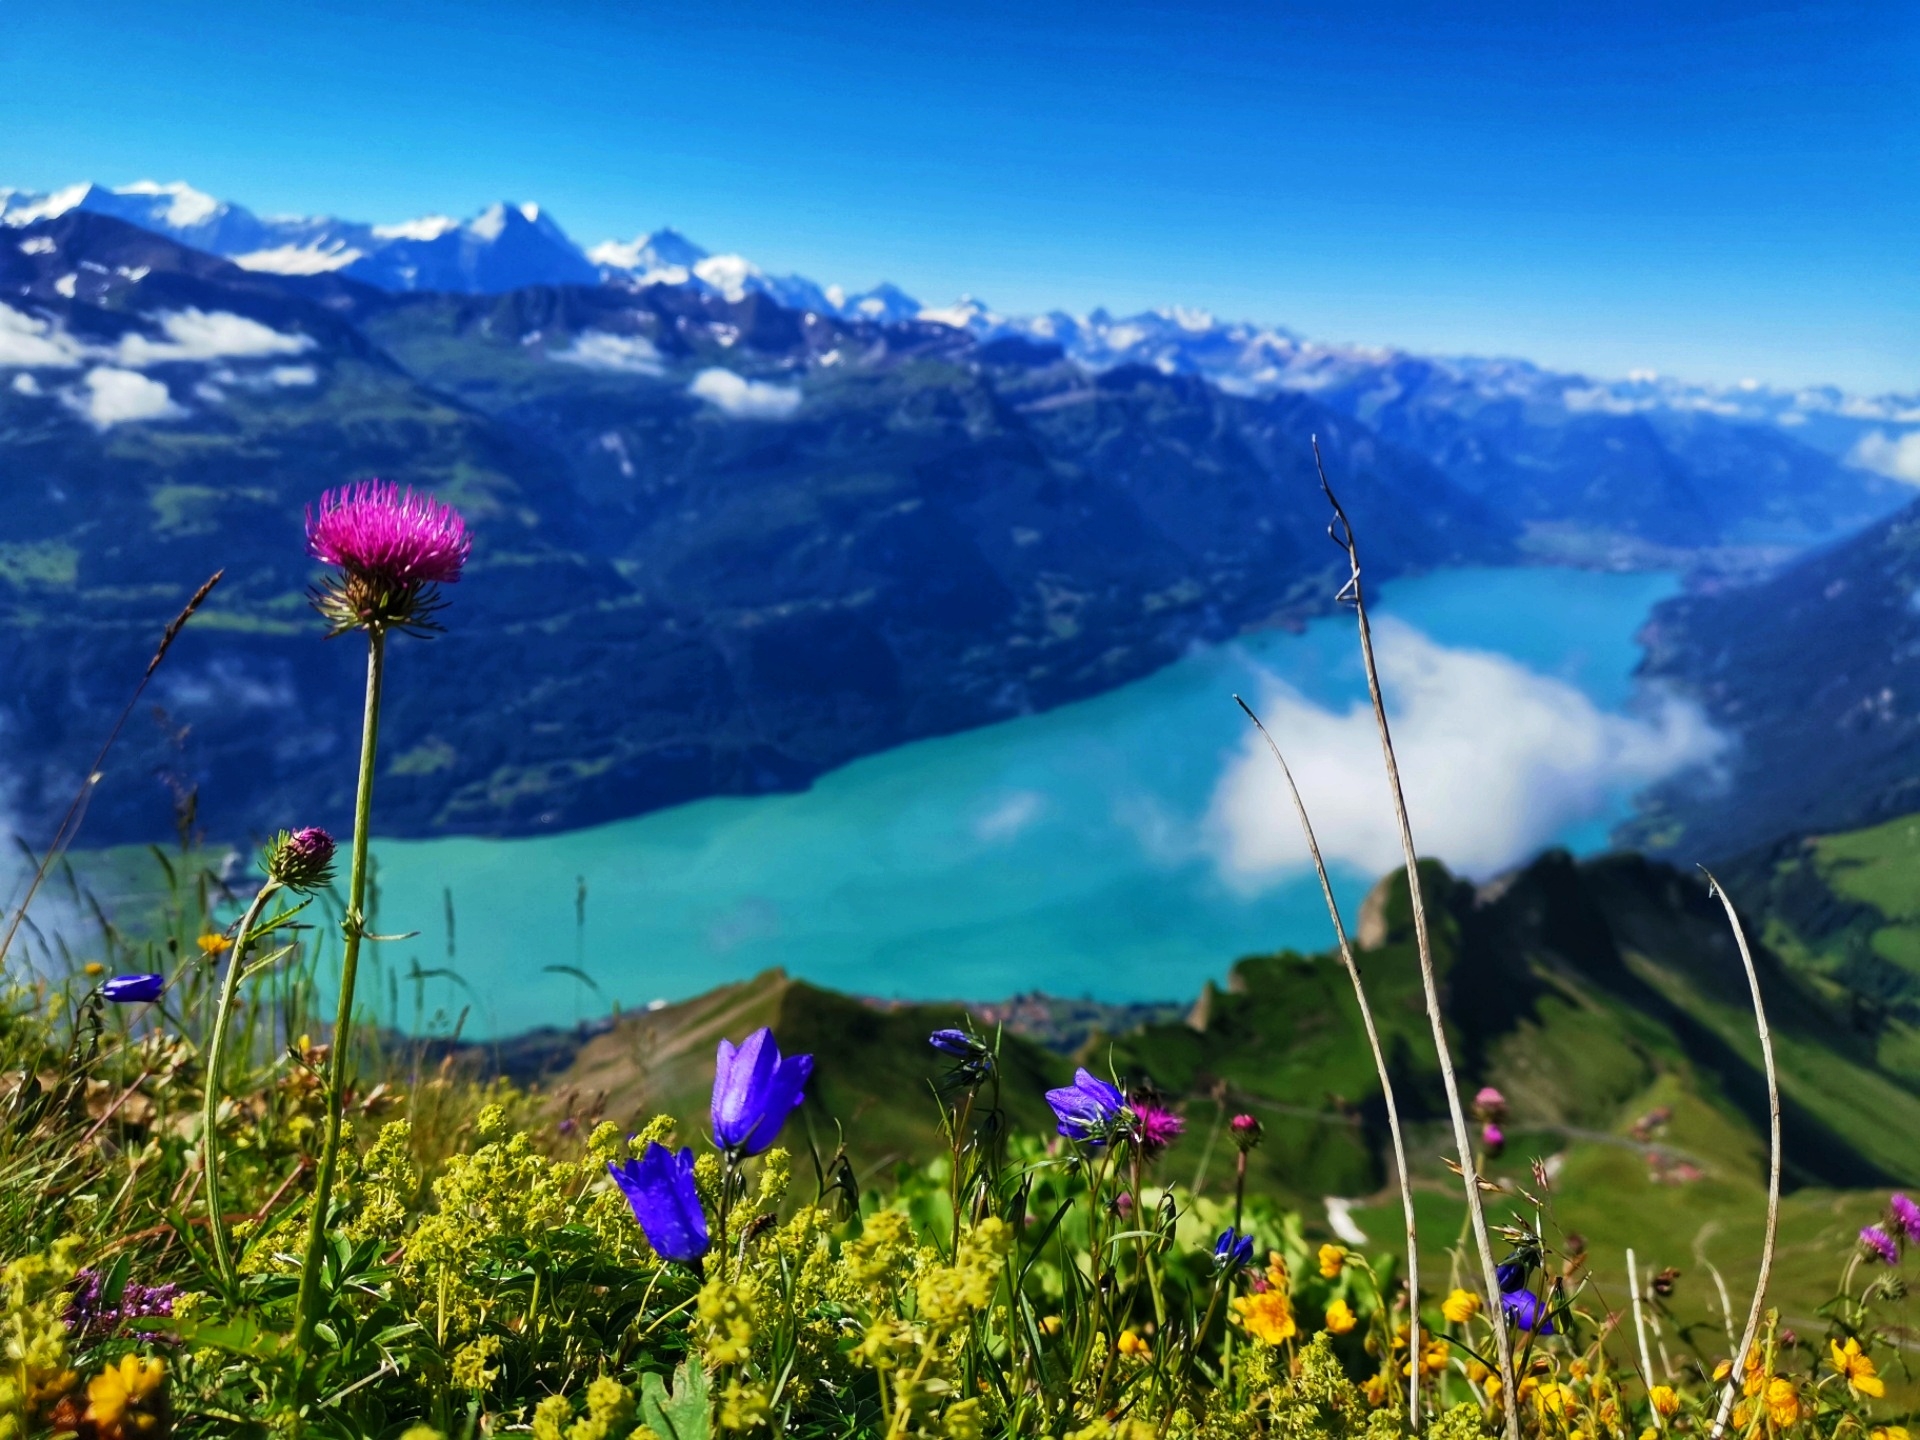 A picture book view. Lake Brienz enchants you at the foot of Eiger, Mönch and Jungfrau (c) Ariane Schild